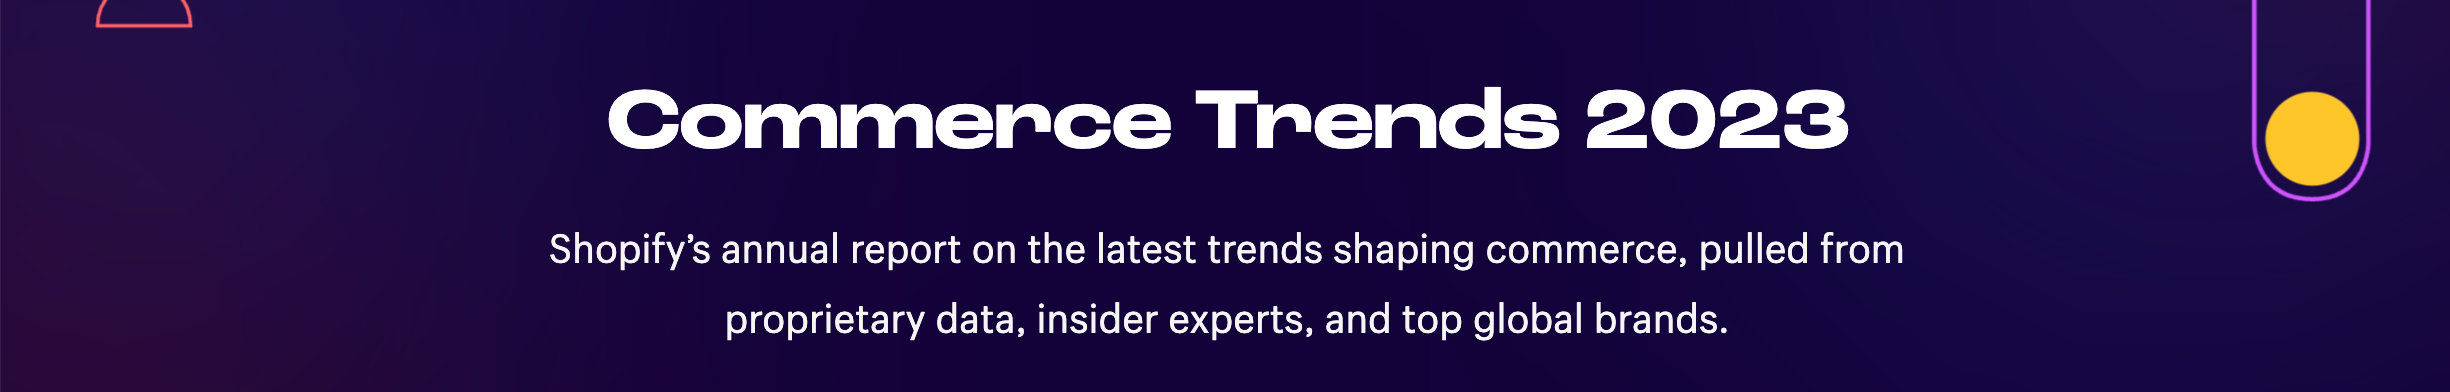 SHOPIFY COMMERCE TRENDS BANNER